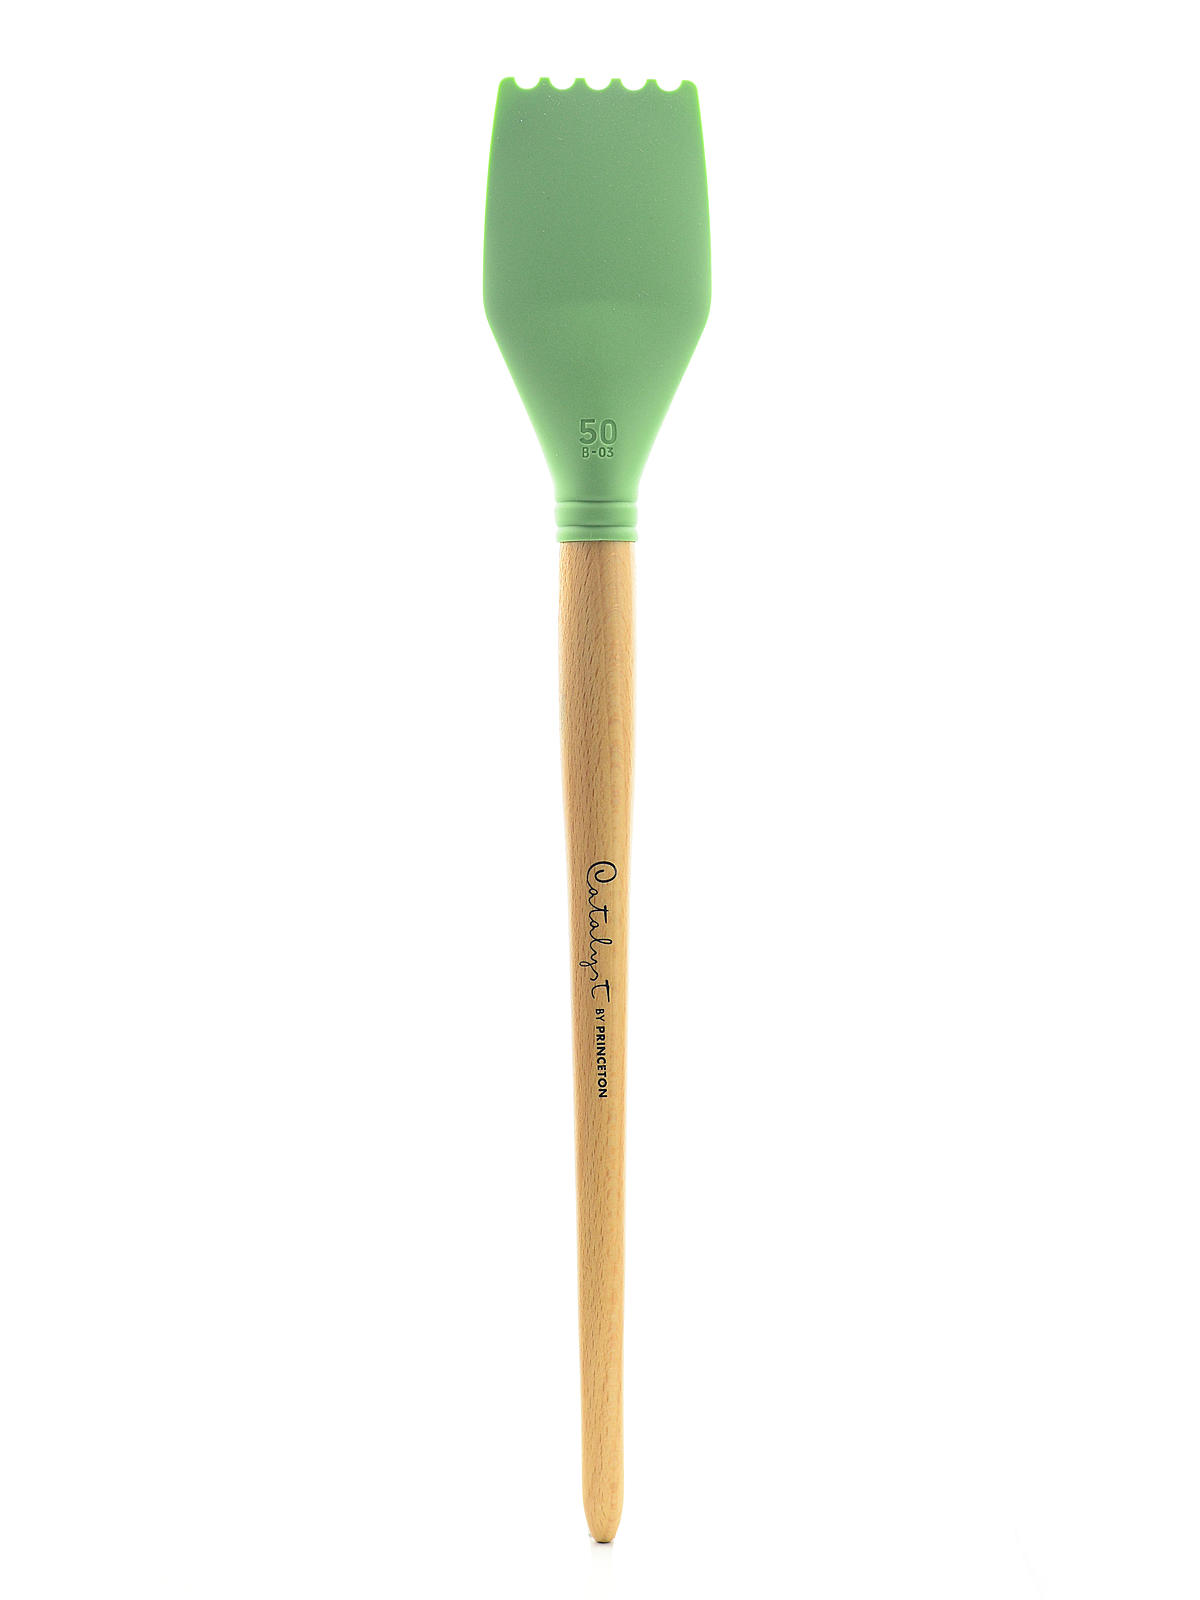 Catalyst Silicone Tools Blade Size 50 No. 3 Green